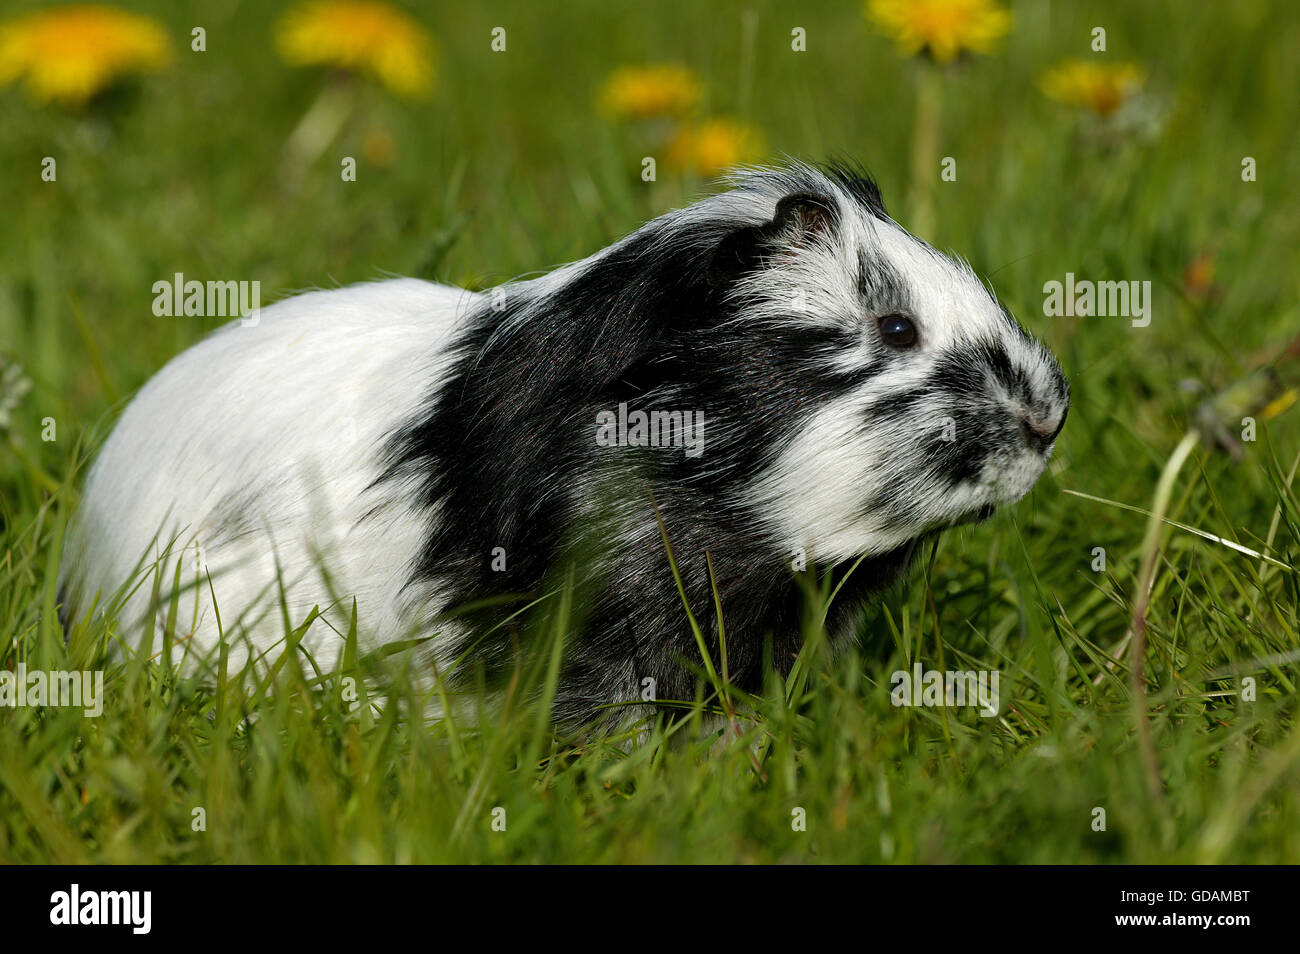 Guinea Pig, cavia porcellus, Adult with Dandelions Stock Photo